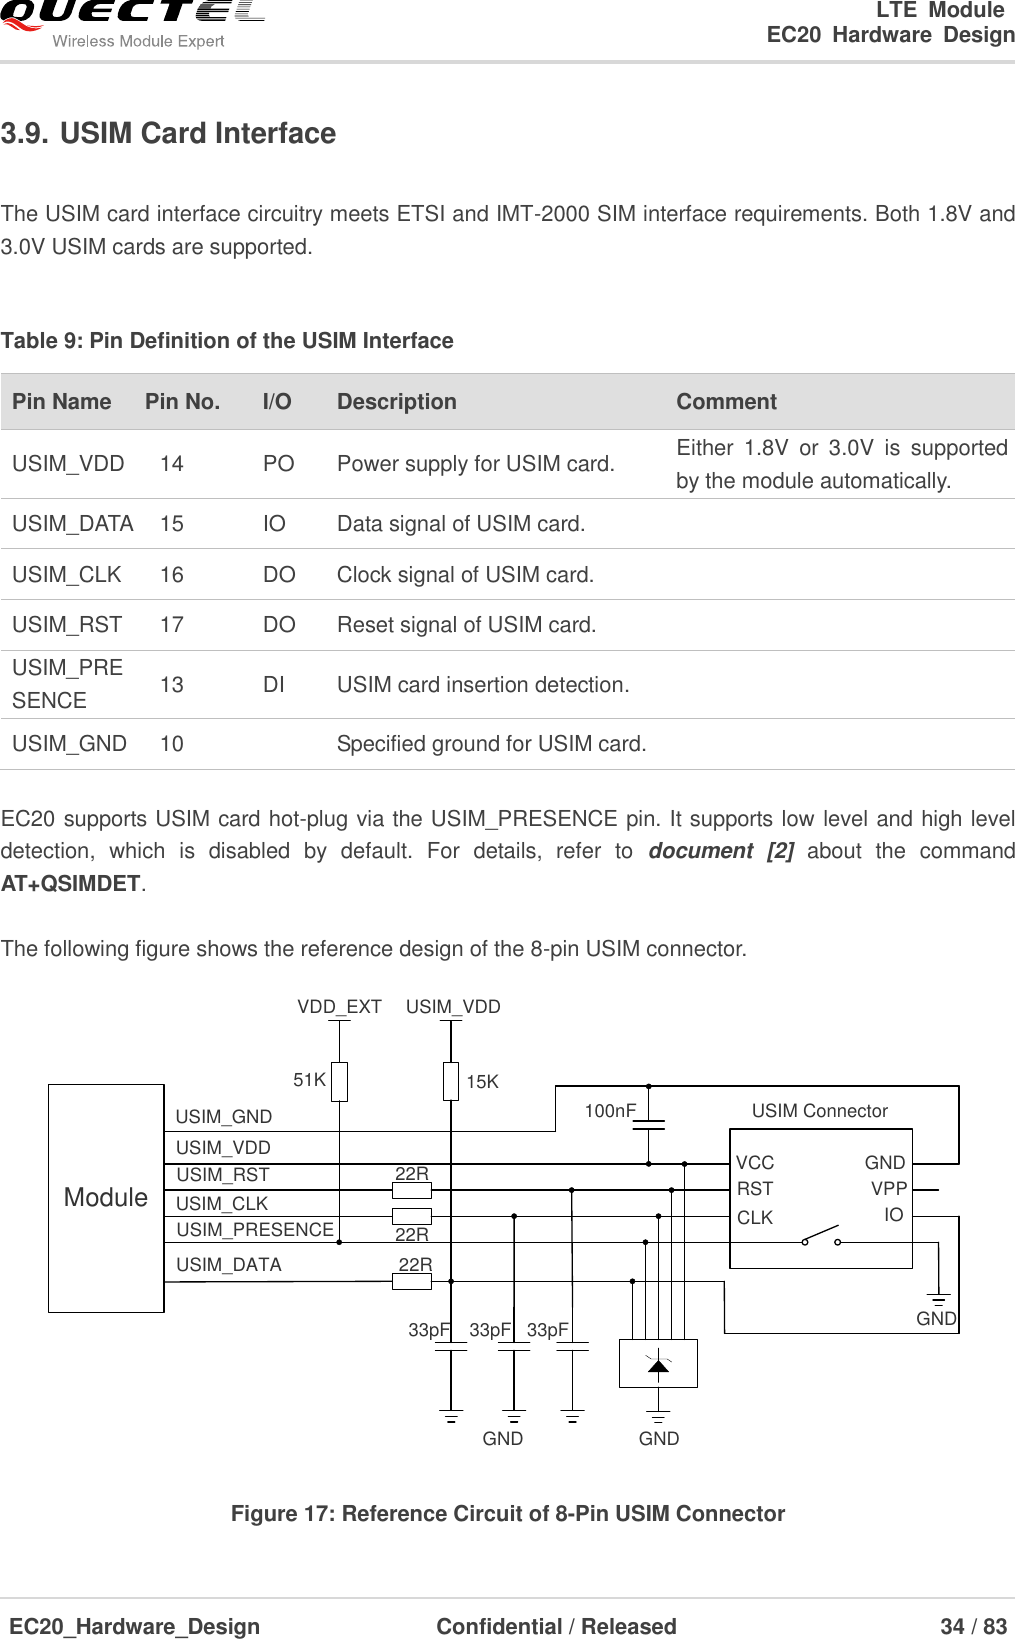                                                                        LTE  Module                                                                   EC20  Hardware  Design  EC20_Hardware_Design                  Confidential / Released                            34 / 83     3.9. USIM Card Interface  The USIM card interface circuitry meets ETSI and IMT-2000 SIM interface requirements. Both 1.8V and 3.0V USIM cards are supported.  Table 9: Pin Definition of the USIM Interface Pin Name   Pin No. I/O Description Comment USIM_VDD 14 PO Power supply for USIM card. Either  1.8V  or  3.0V  is  supported by the module automatically. USIM_DATA 15 IO Data signal of USIM card.  USIM_CLK 16 DO Clock signal of USIM card.  USIM_RST 17 DO Reset signal of USIM card.  USIM_PRESENCE 13 DI USIM card insertion detection.  USIM_GND 10  Specified ground for USIM card.   EC20 supports USIM card hot-plug via the USIM_PRESENCE pin. It supports low level and high level detection,  which  is  disabled  by  default.  For  details,  refer  to  document  [2]  about  the  command AT+QSIMDET.  The following figure shows the reference design of the 8-pin USIM connector. ModuleUSIM_VDDUSIM_GNDUSIM_RSTUSIM_CLKUSIM_DATAUSIM_PRESENCE22R22R22RVDD_EXT51K100nF USIM ConnectorGNDGND33pF 33pF 33pFVCCRSTCLK IOVPPGNDGNDUSIM_VDD15K Figure 17: Reference Circuit of 8-Pin USIM Connector 